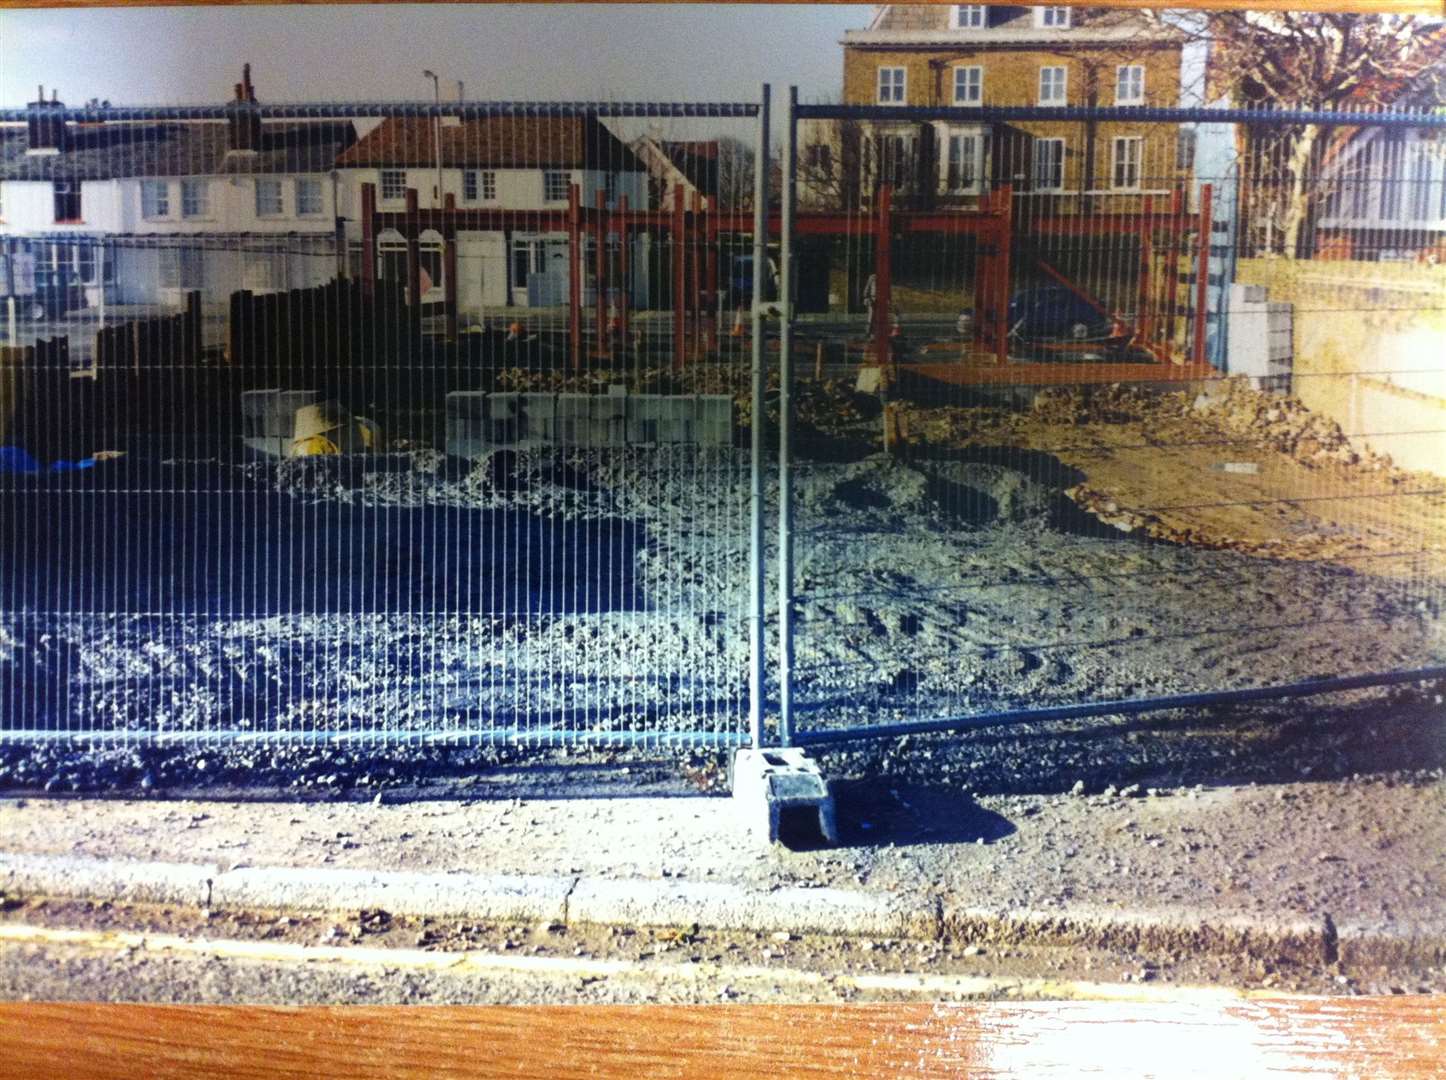 The Royal Marines swimming pool in Deal was demolished to make way for Cedars Surgery